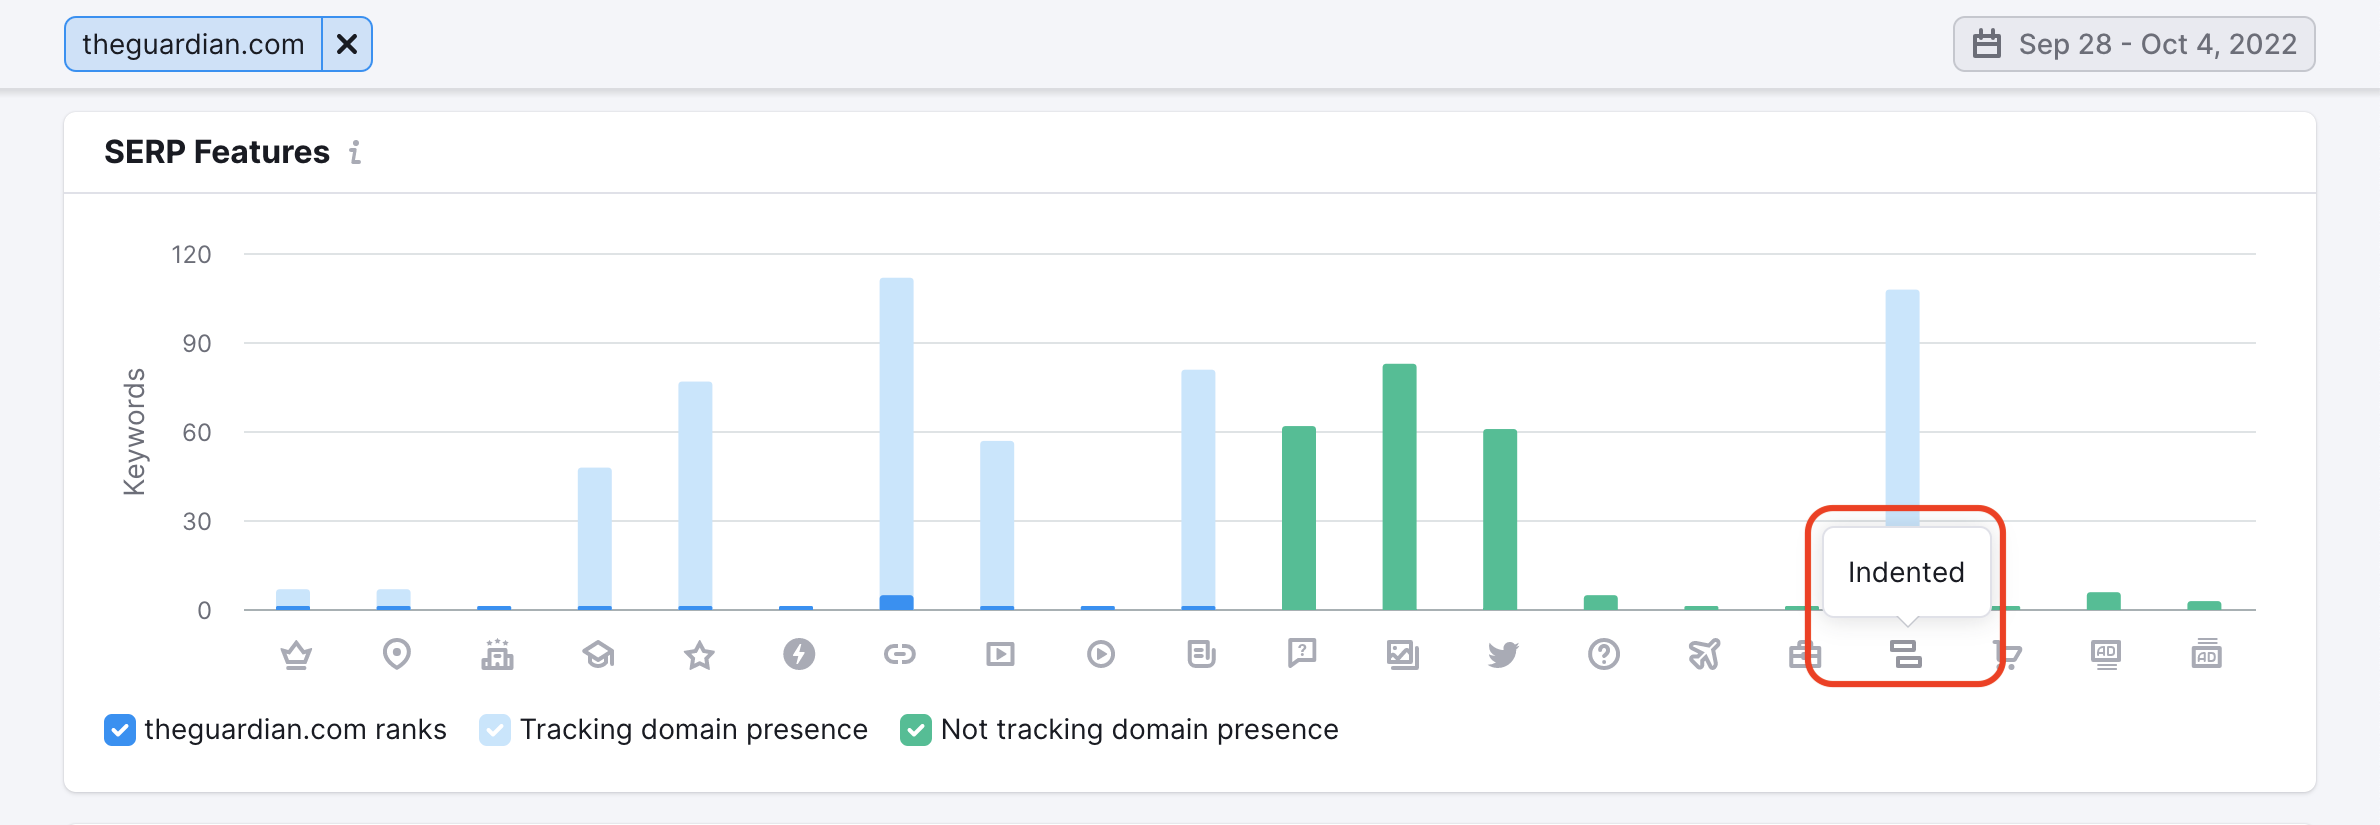 SERP Features report in Position Tracking